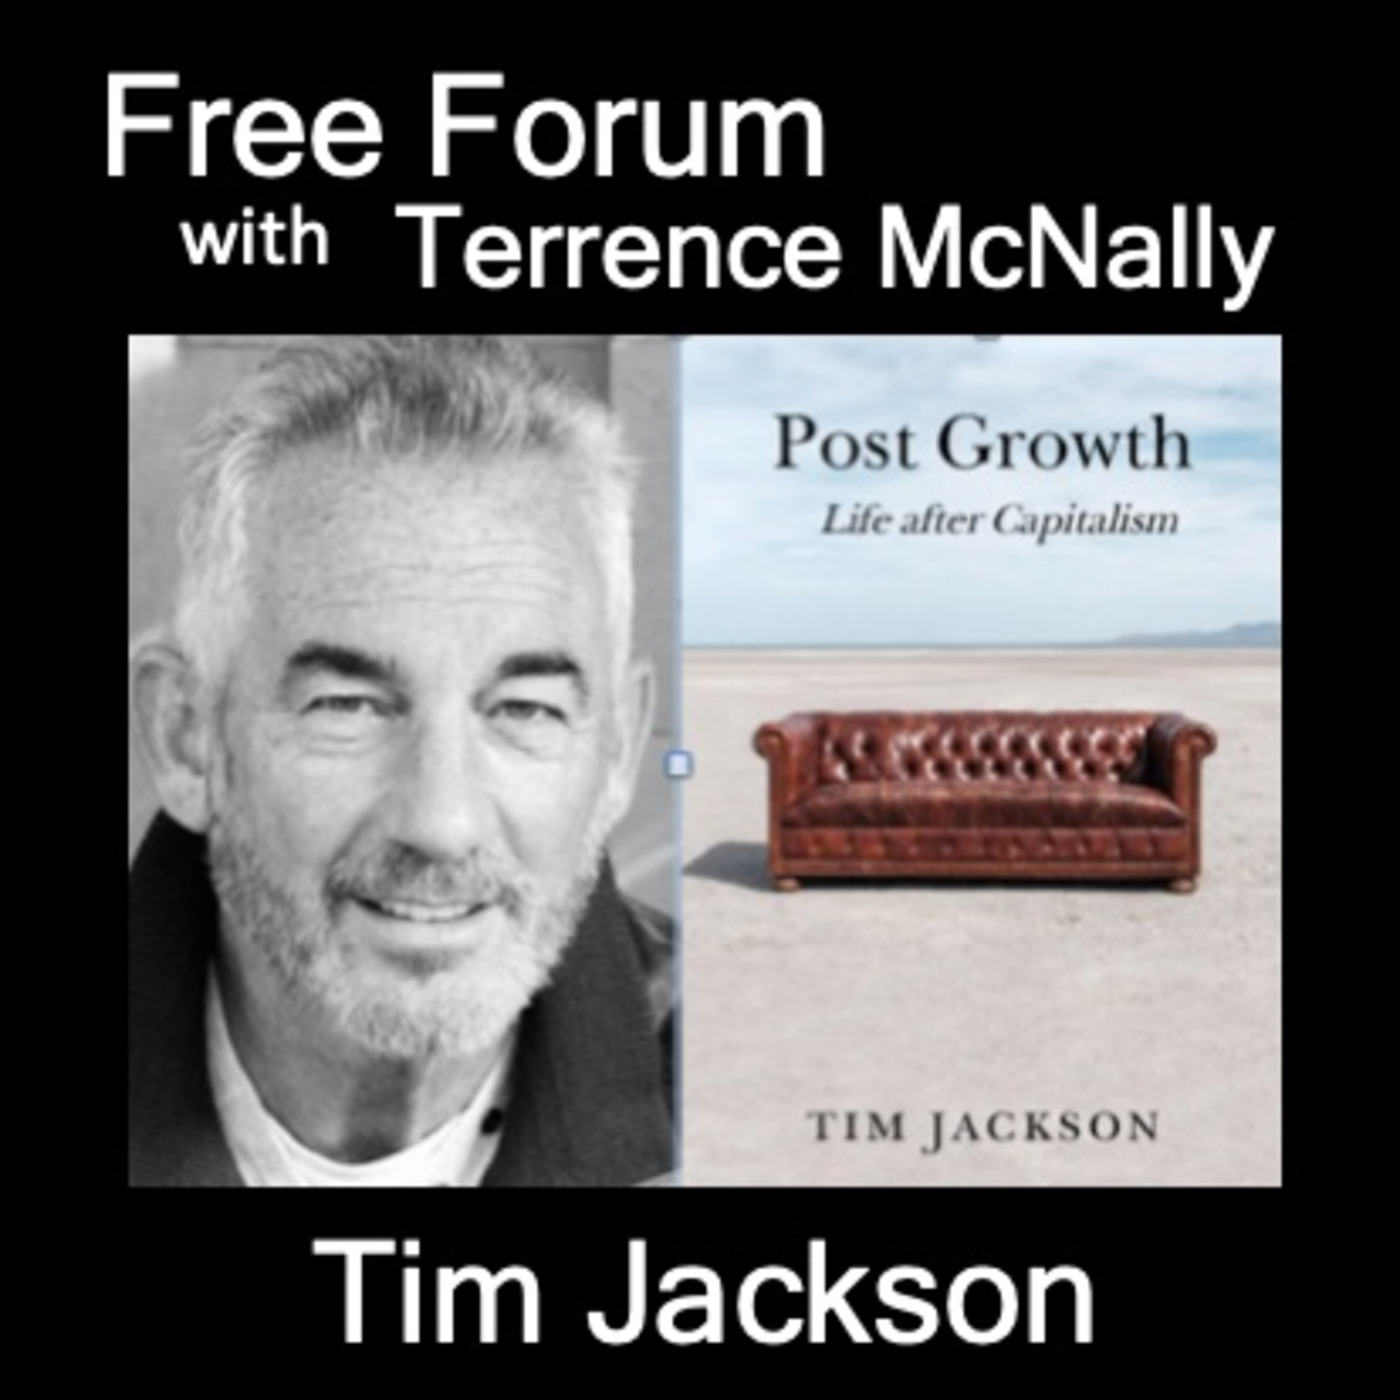 Episode 545: TIM JACKSON, Imagining a just sustainable future-POST GROWTH: Life After Capitalism